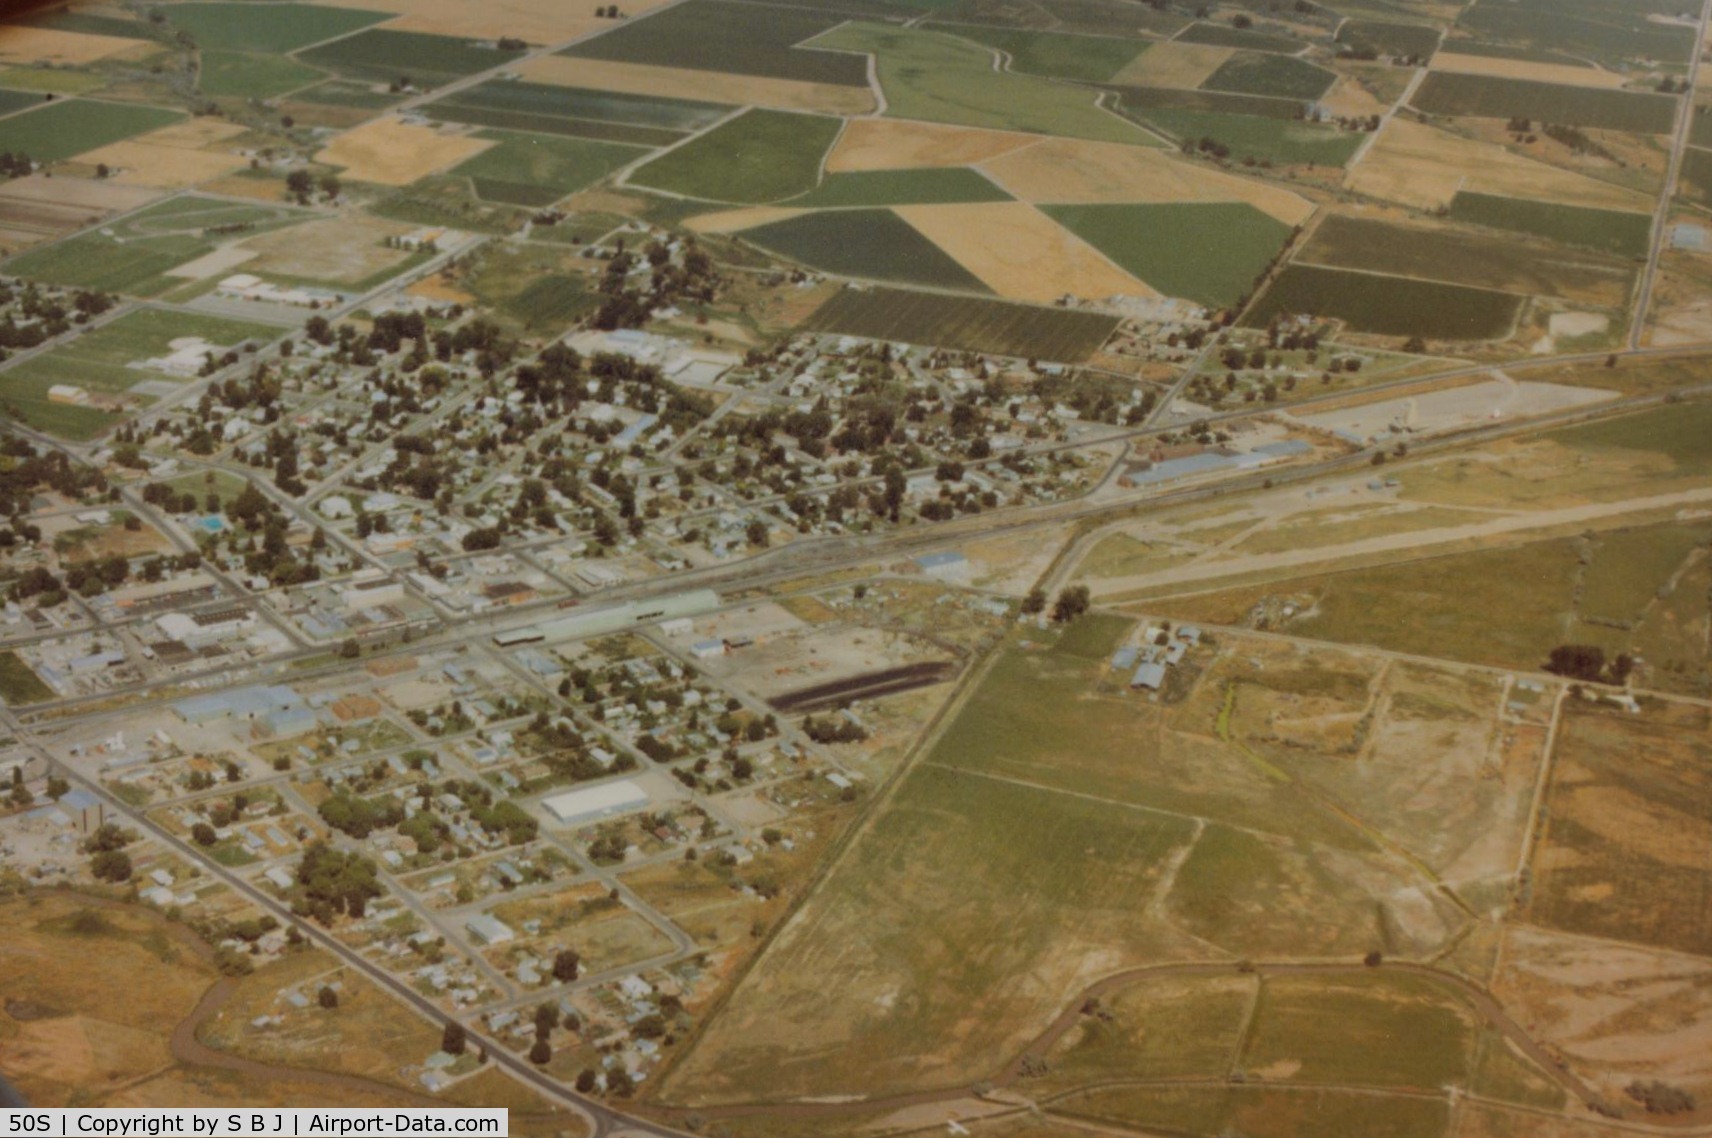 Parma Airport (50S) - Parma,which is almost an in town airport.